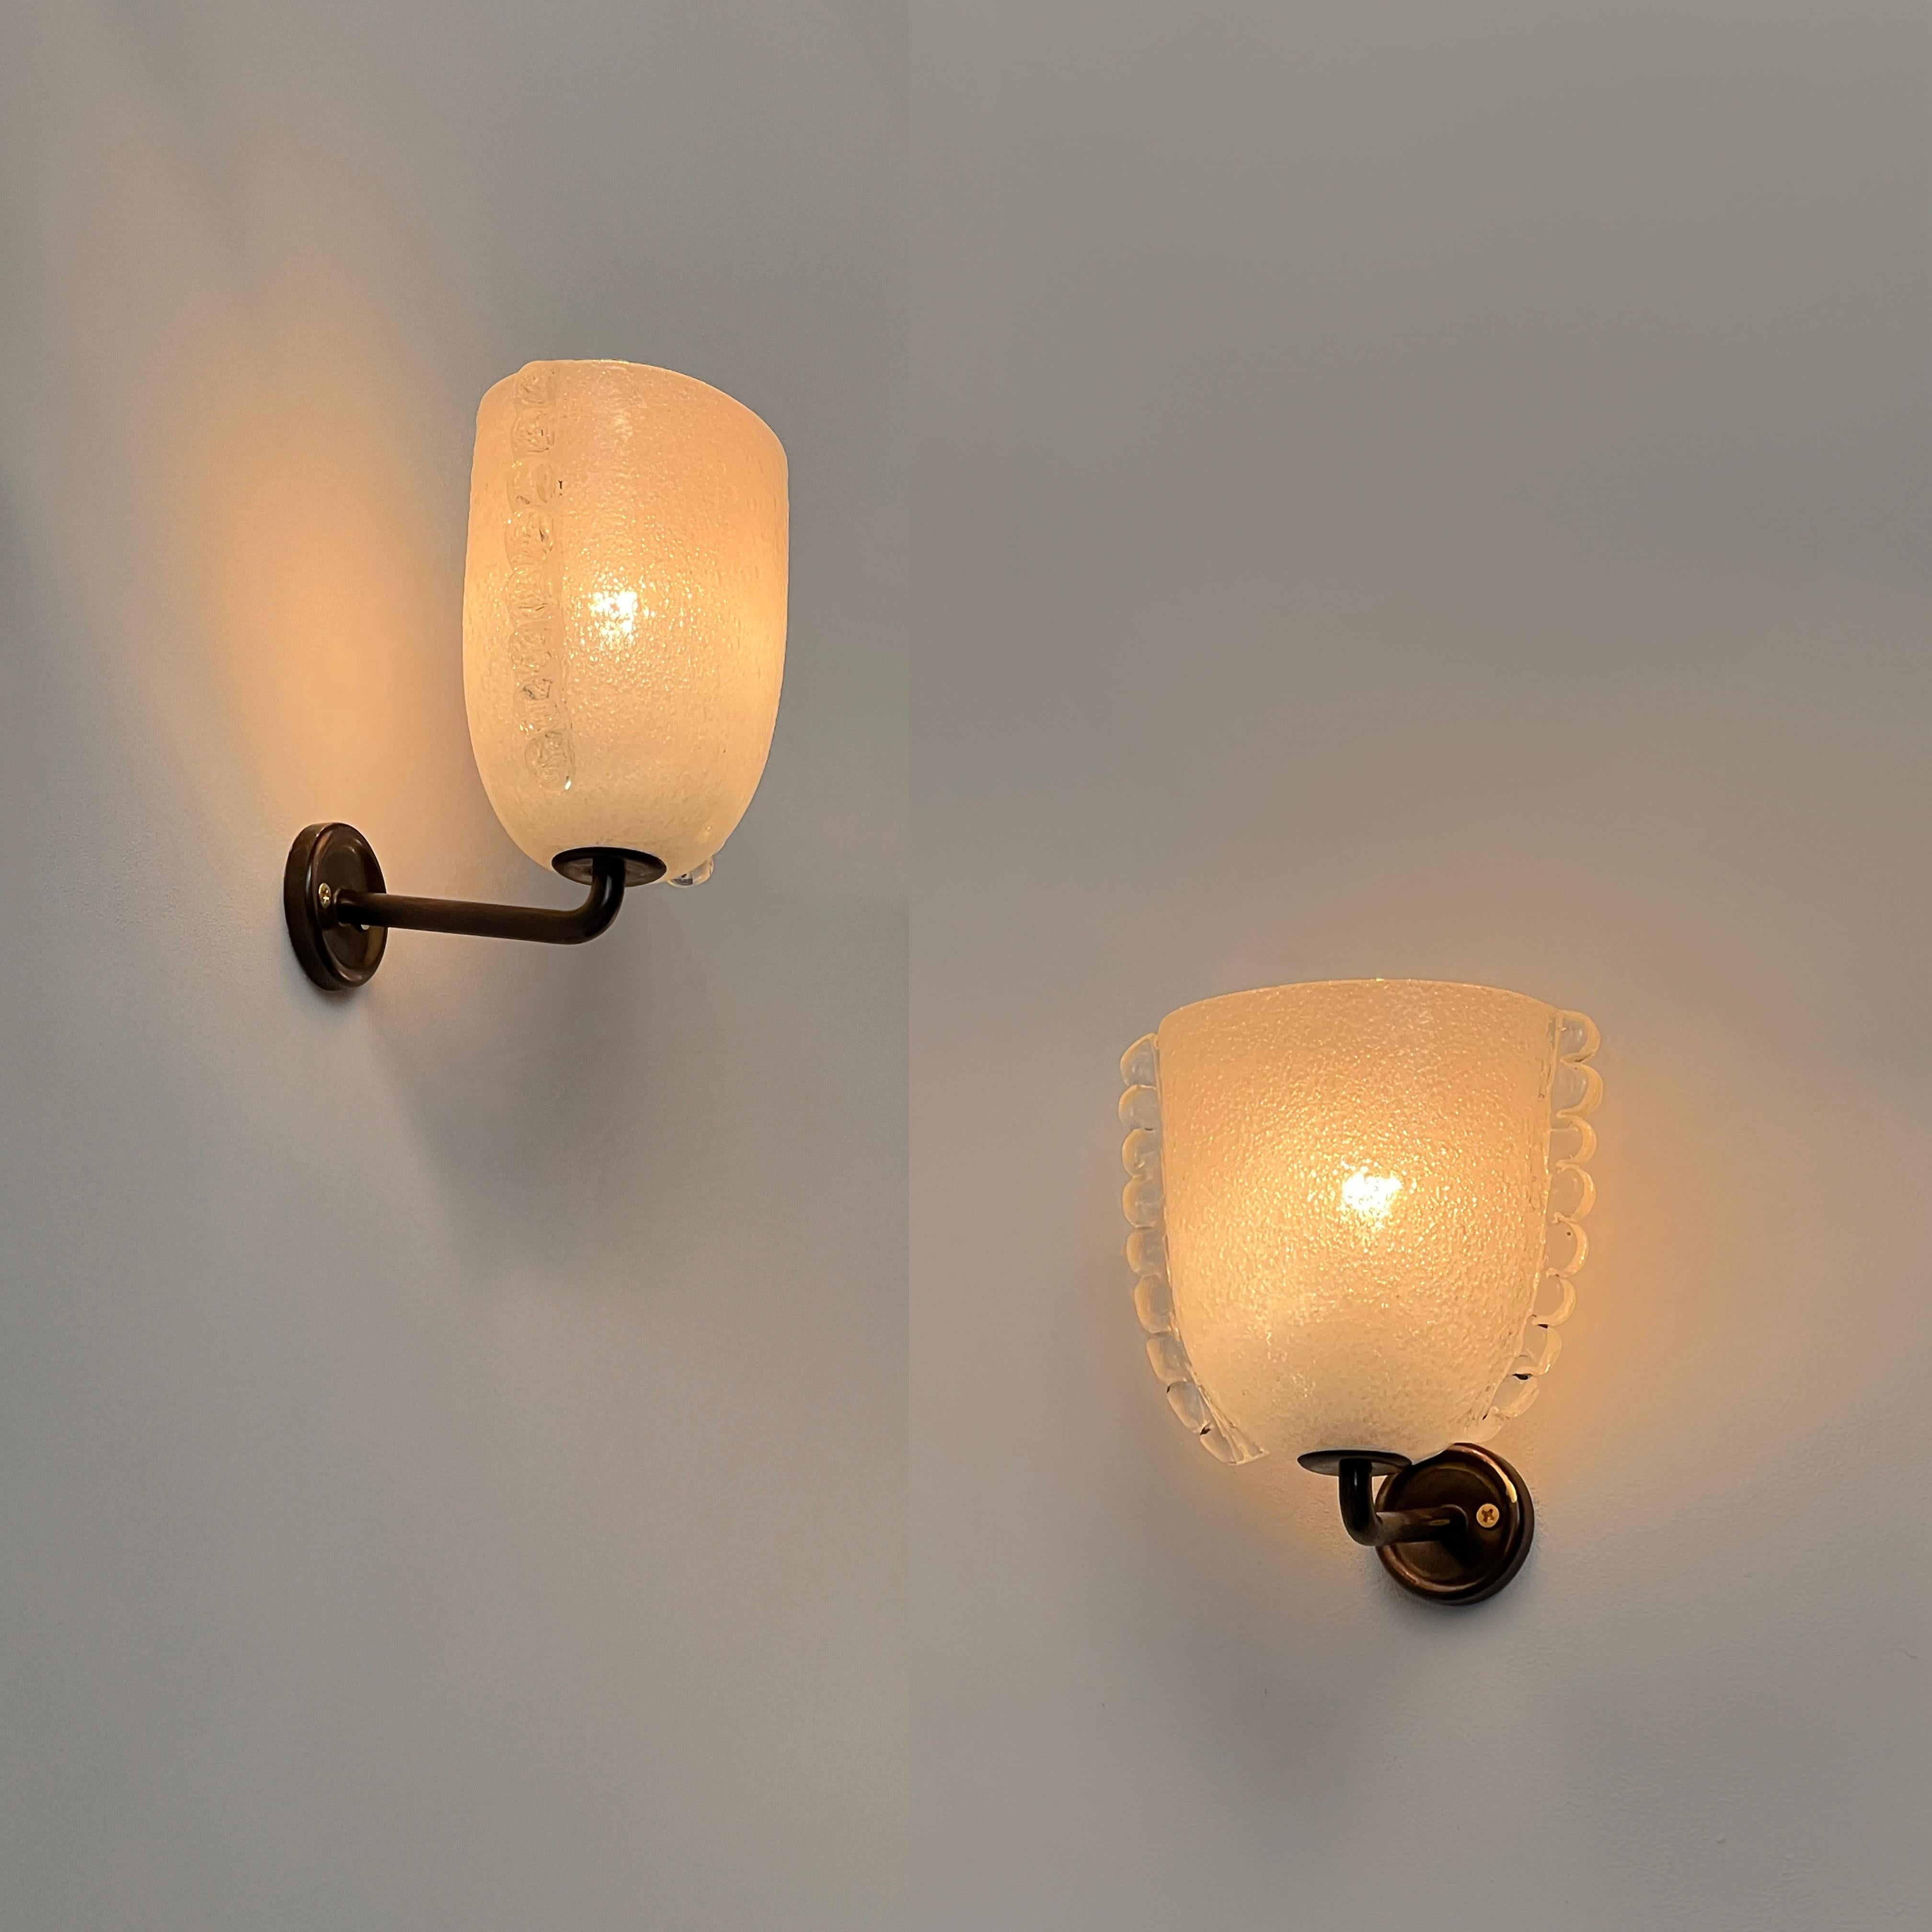 Brass Pair of Murano glass sconces, attributed to Carlo Scarpa. Italy, 1930/40s